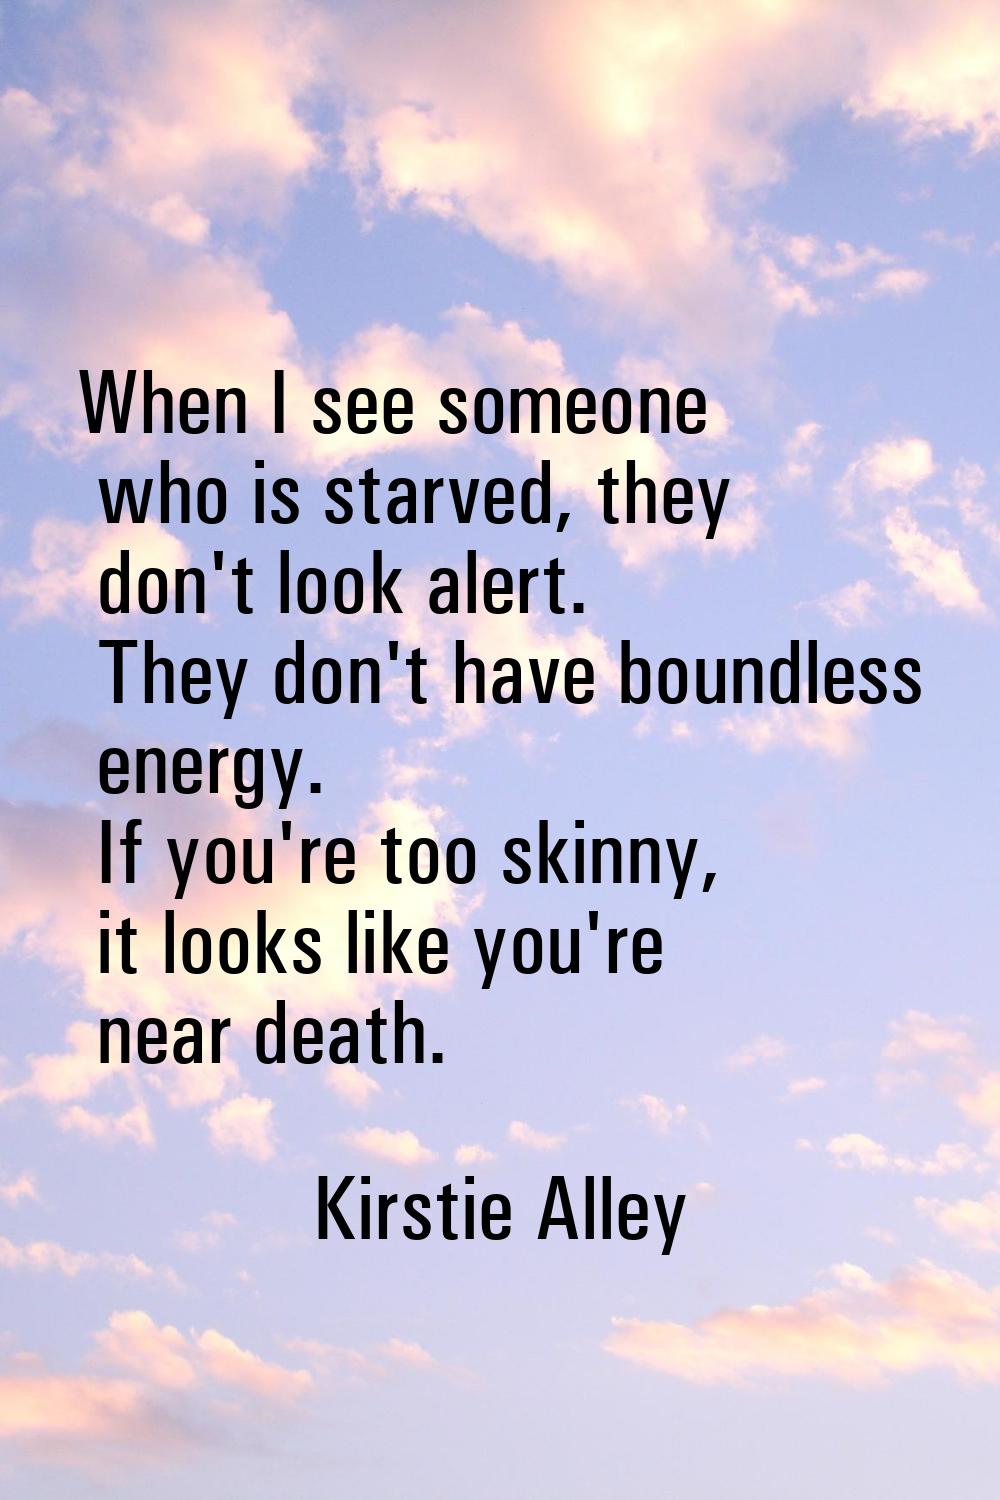 When I see someone who is starved, they don't look alert. They don't have boundless energy. If you'